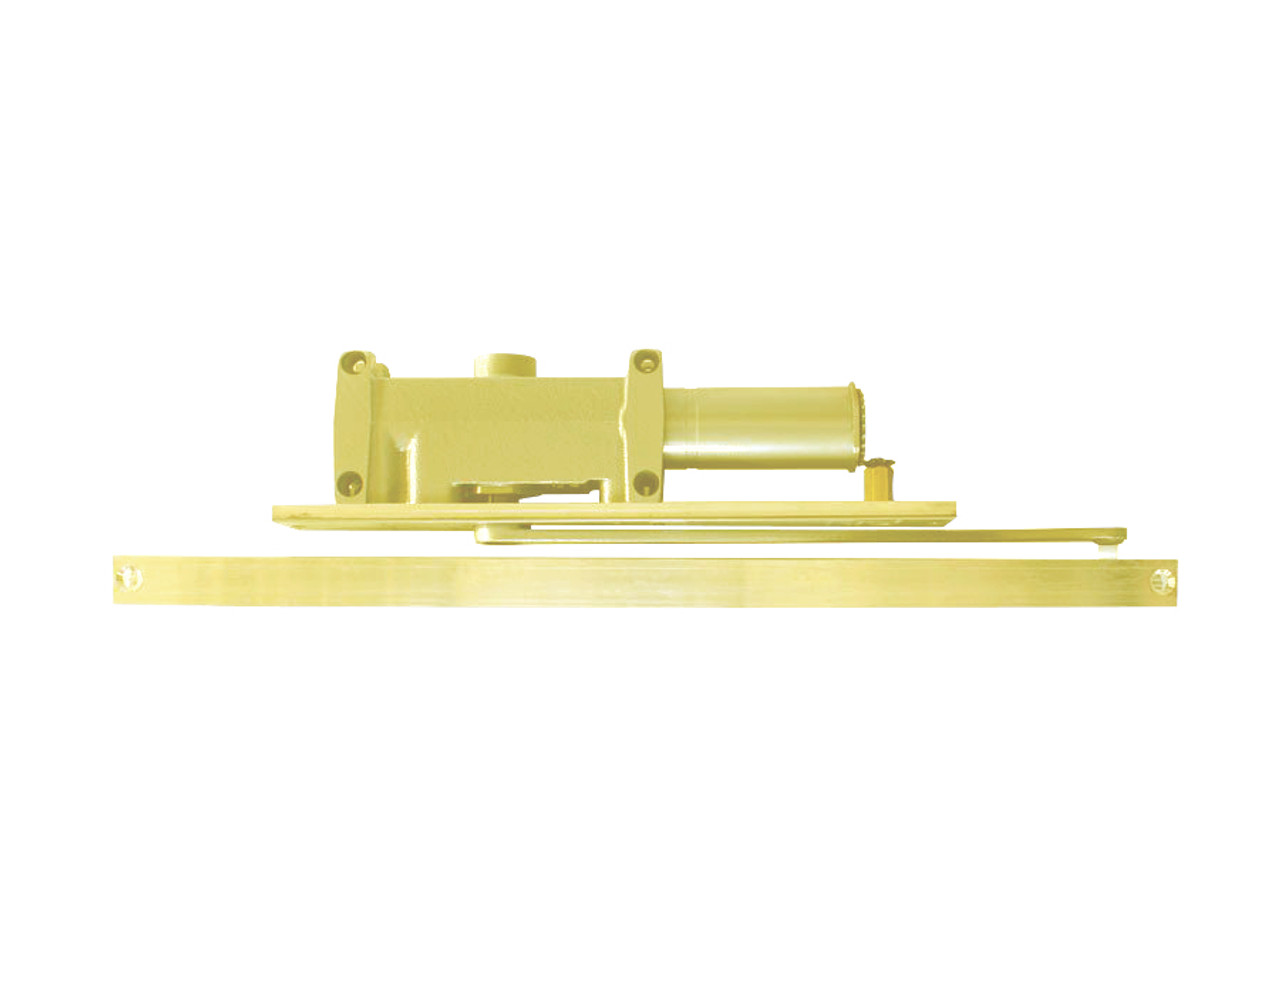 2014-H-RH-US3 LCN Door Closer with Hold Open Arm in Bright Brass Finish